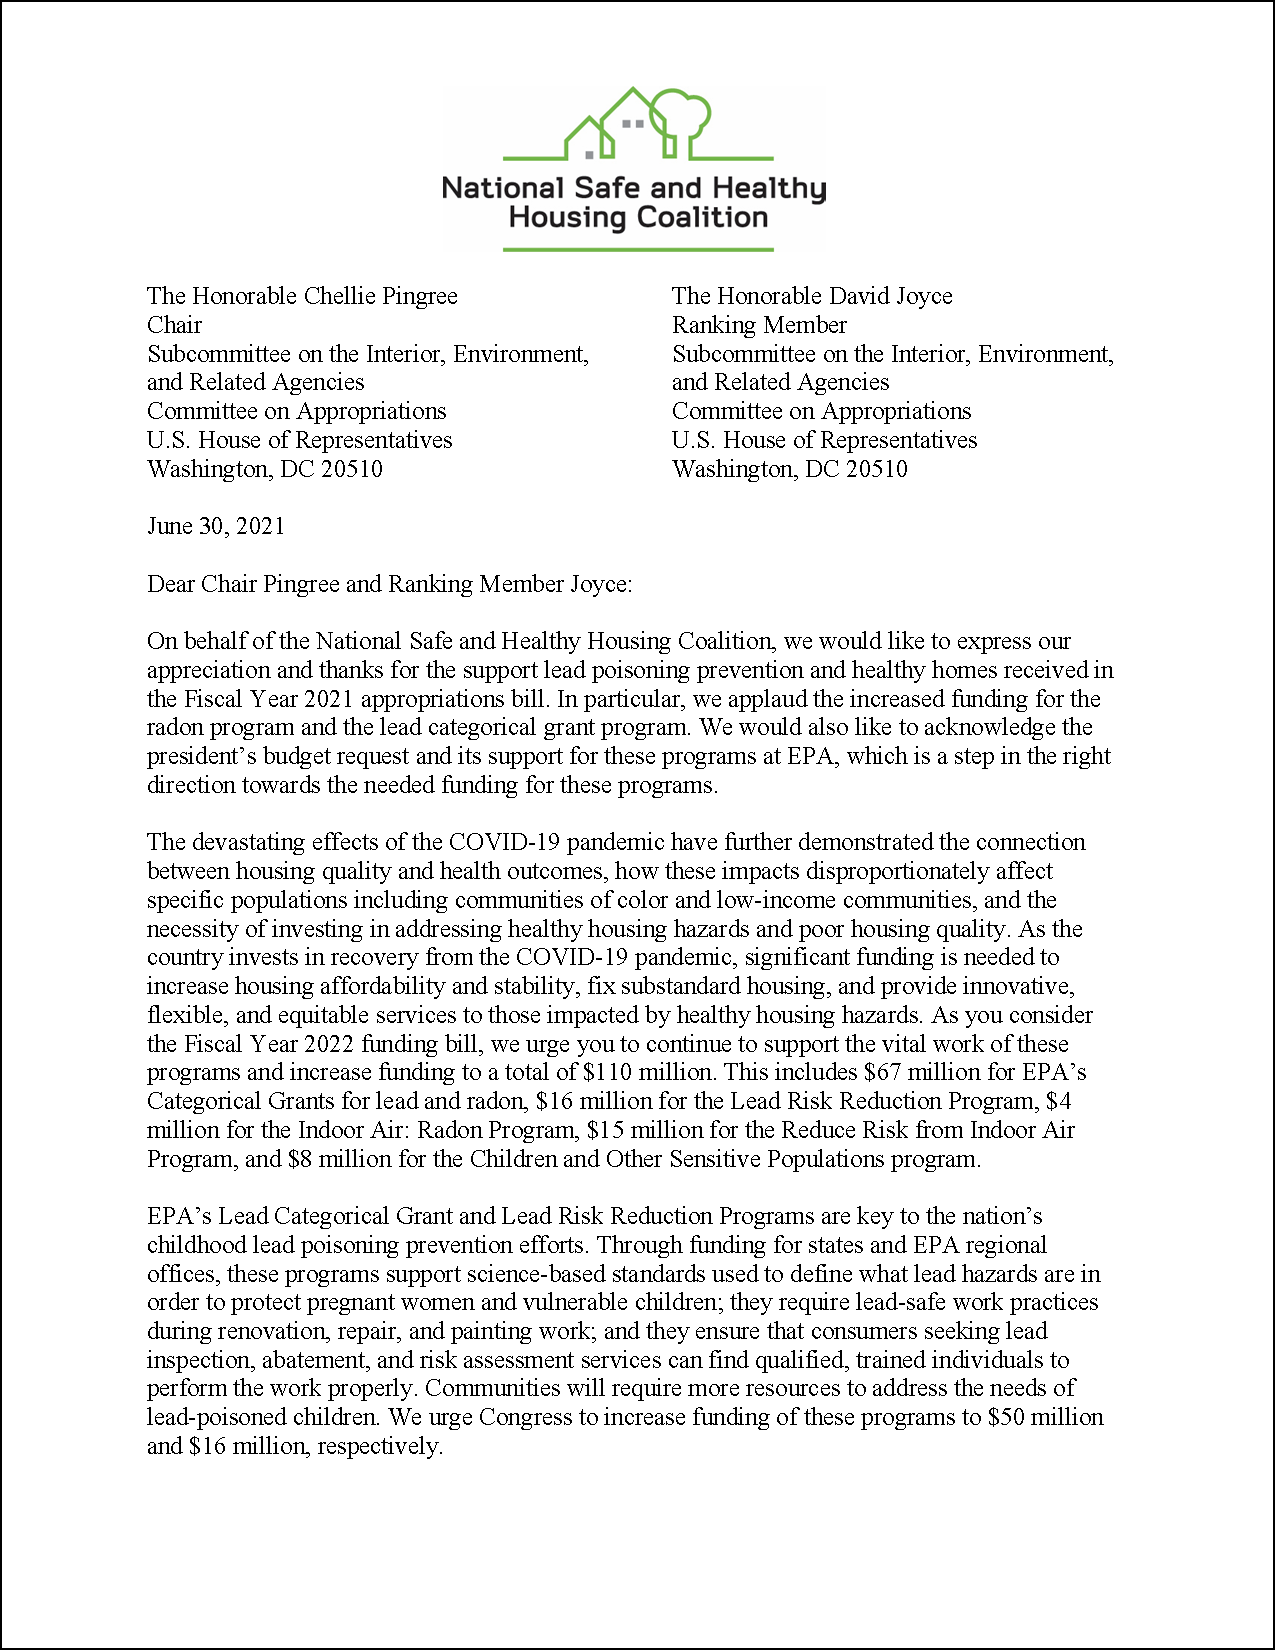 Letter: FY22 Appropriations to U.S. House: EPA Programs [2021.06.30] [NSHHC]